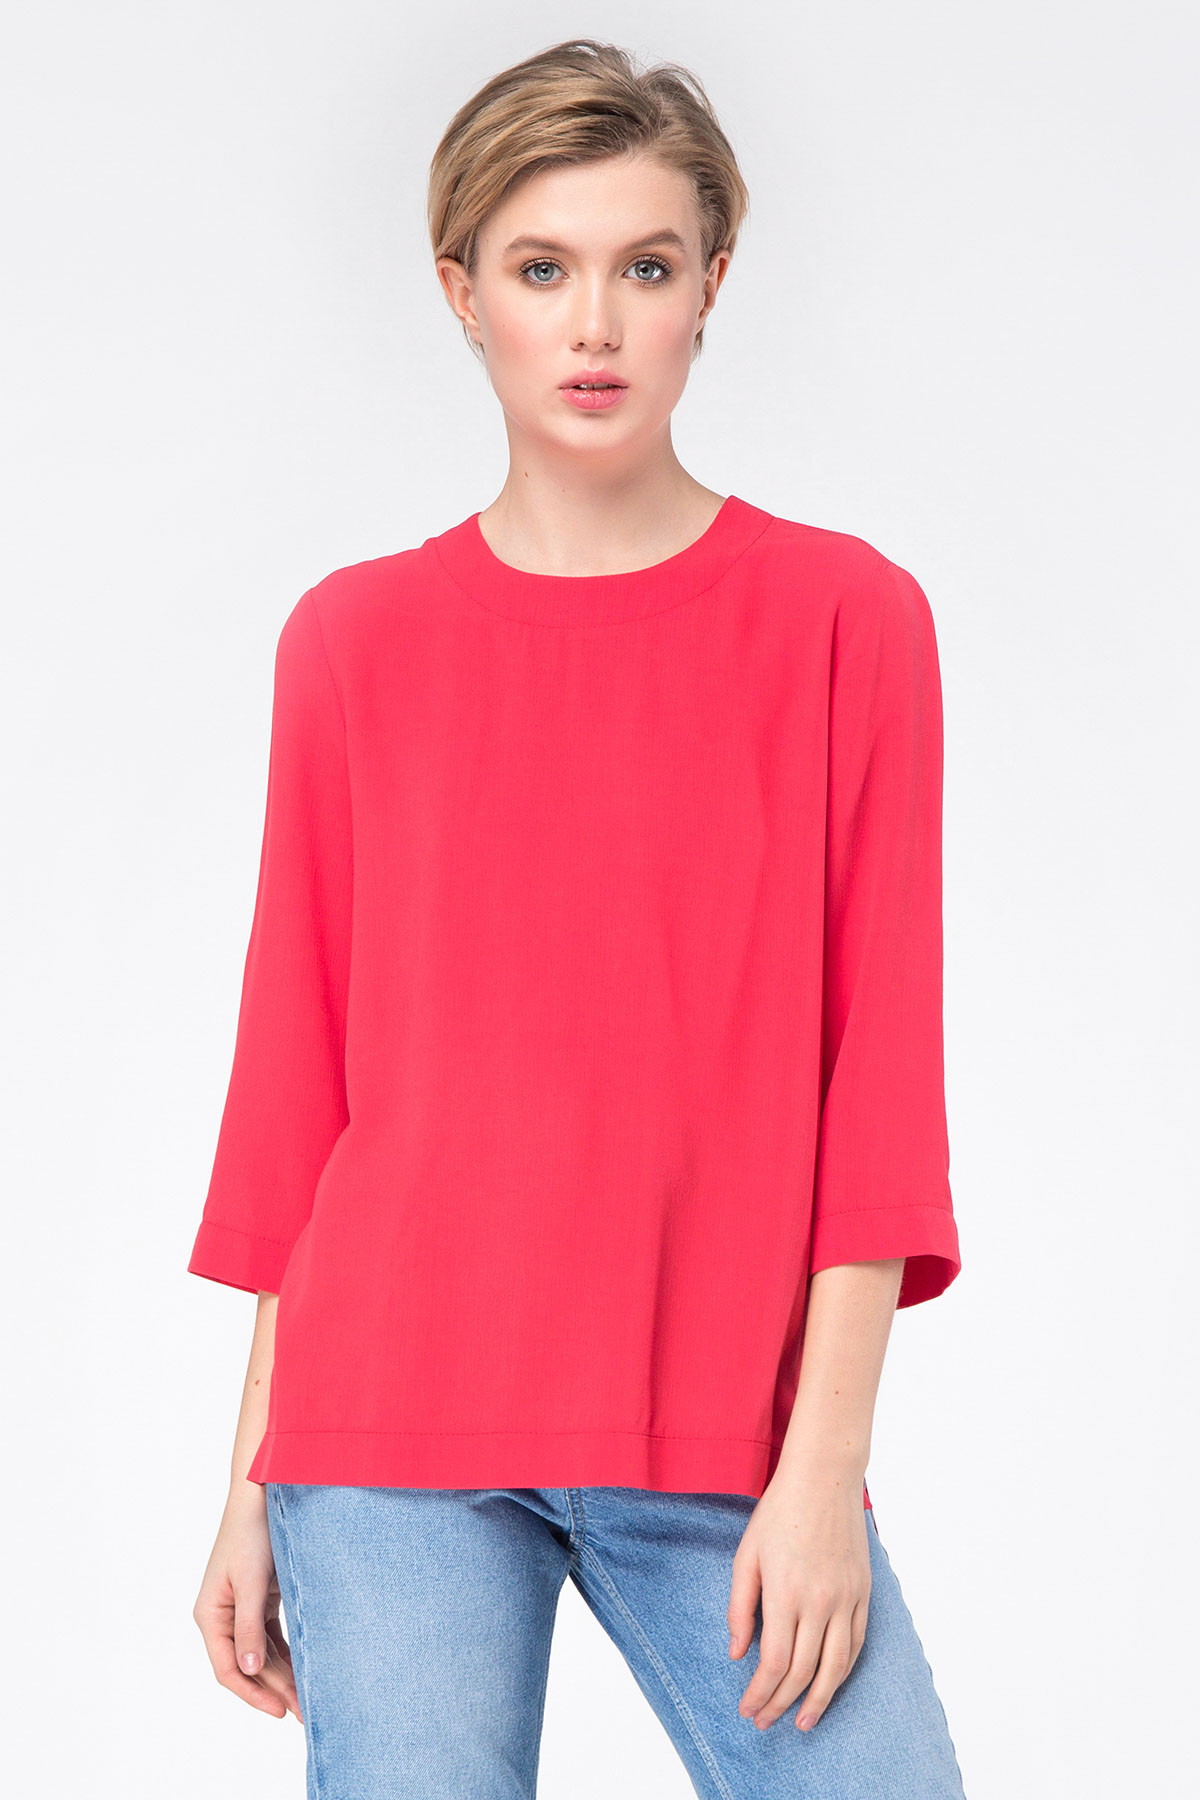 Free red top, photo 2